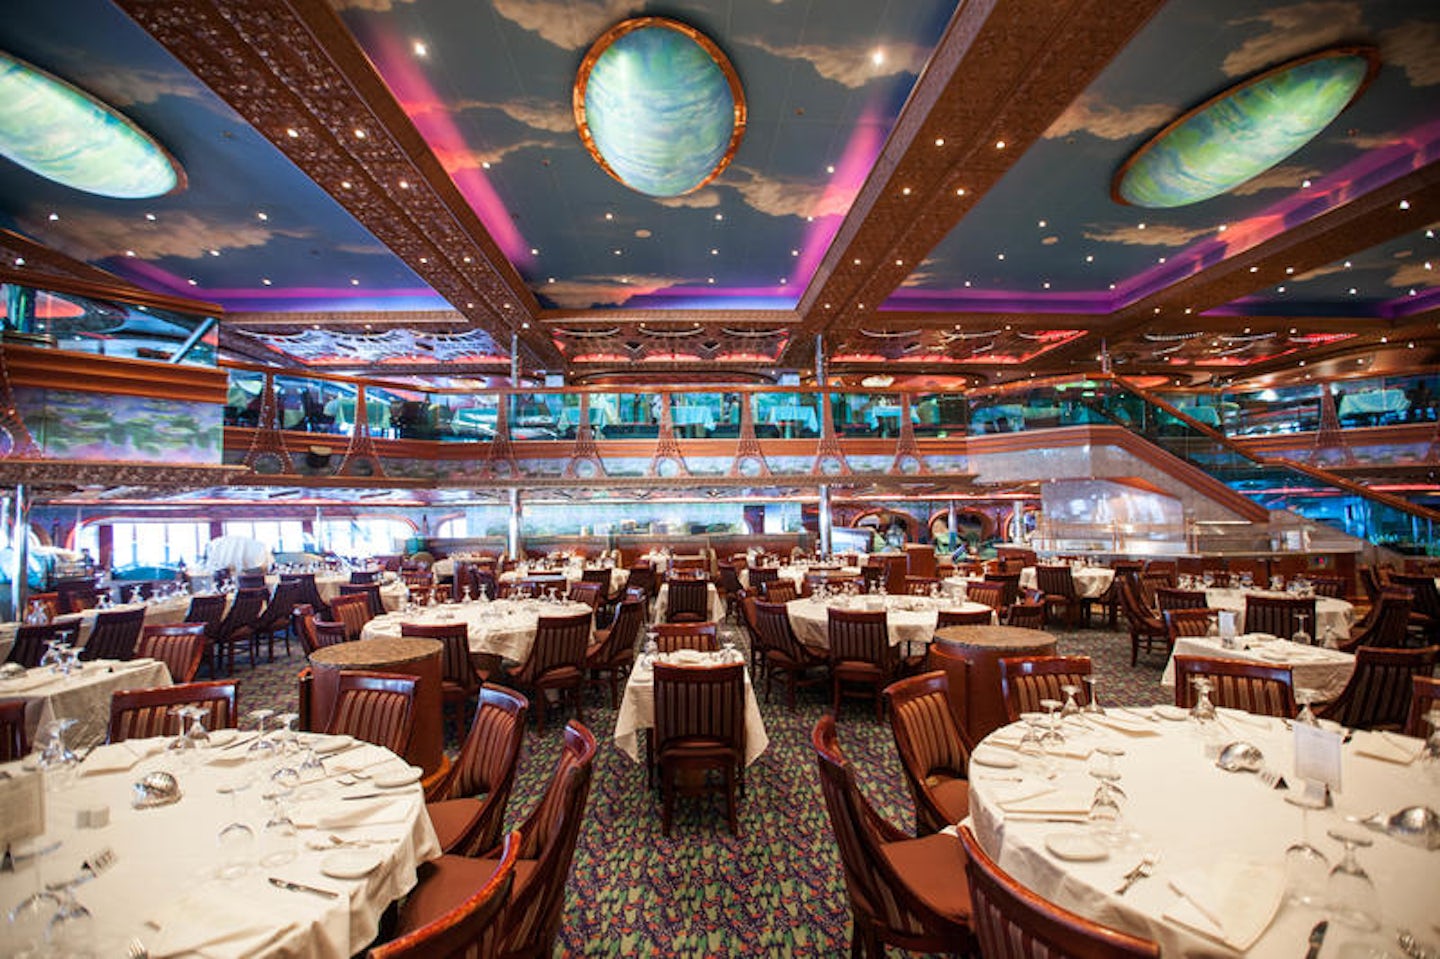 Monet Restaurant on Carnival Conquest